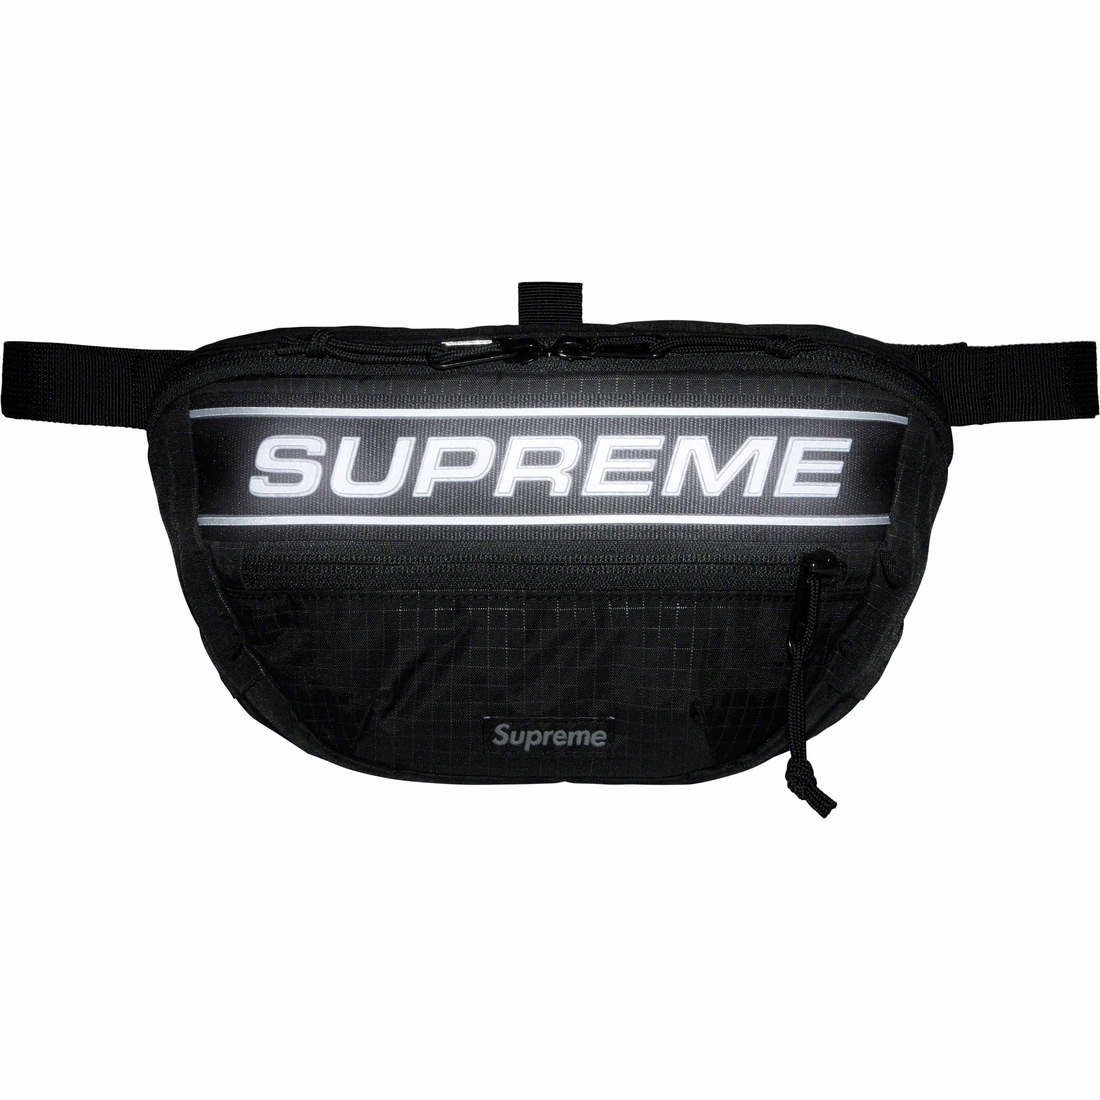 Details on Waist Bag Black from fall winter 2023 (Price is $58)